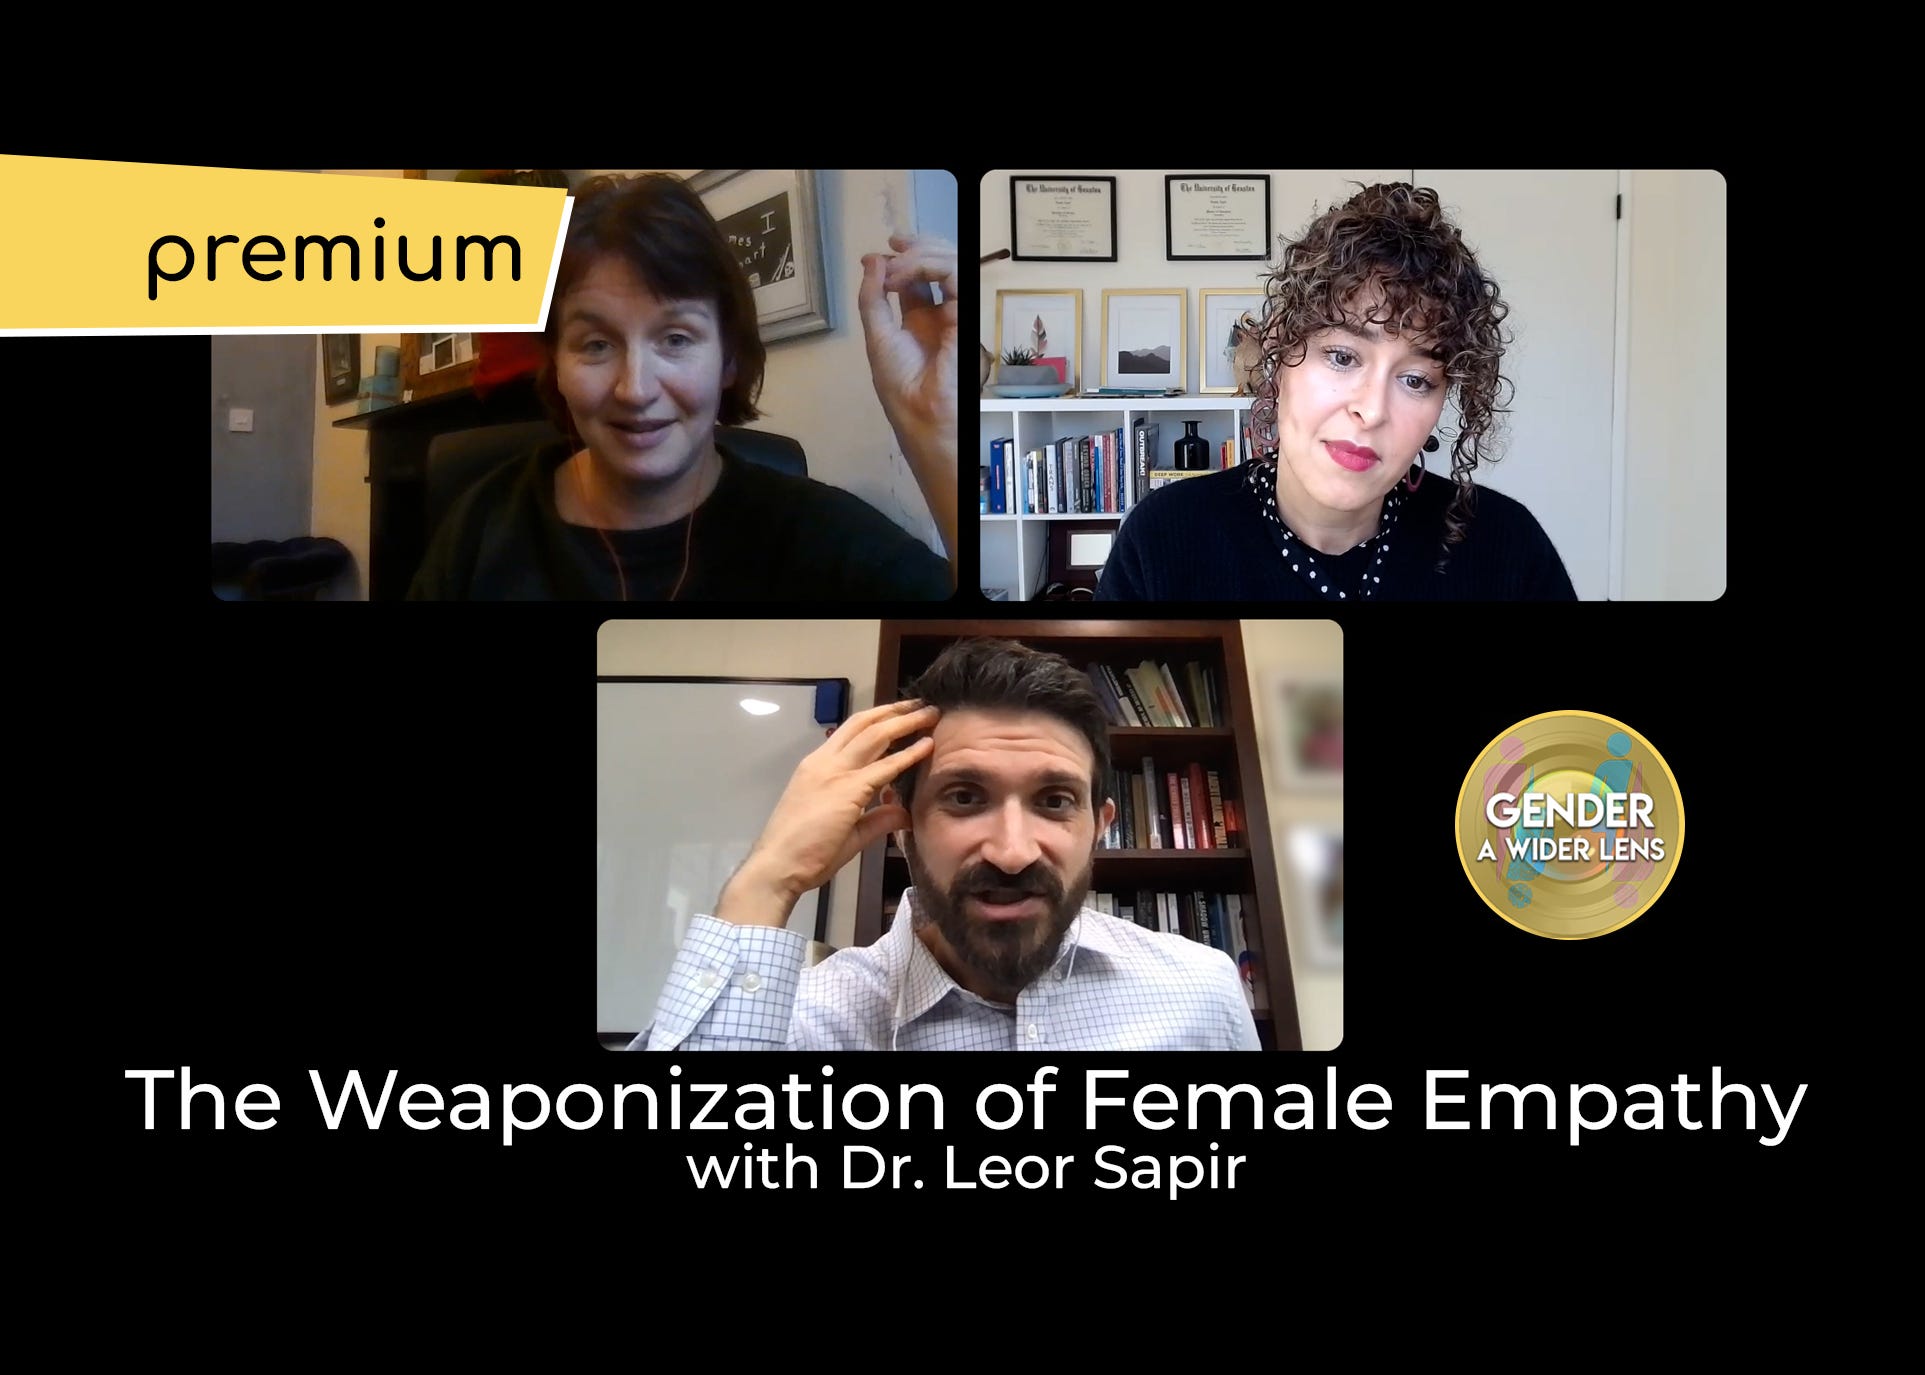 Premium: The Weaponization of Female Empathy with Dr. Leor Sapir